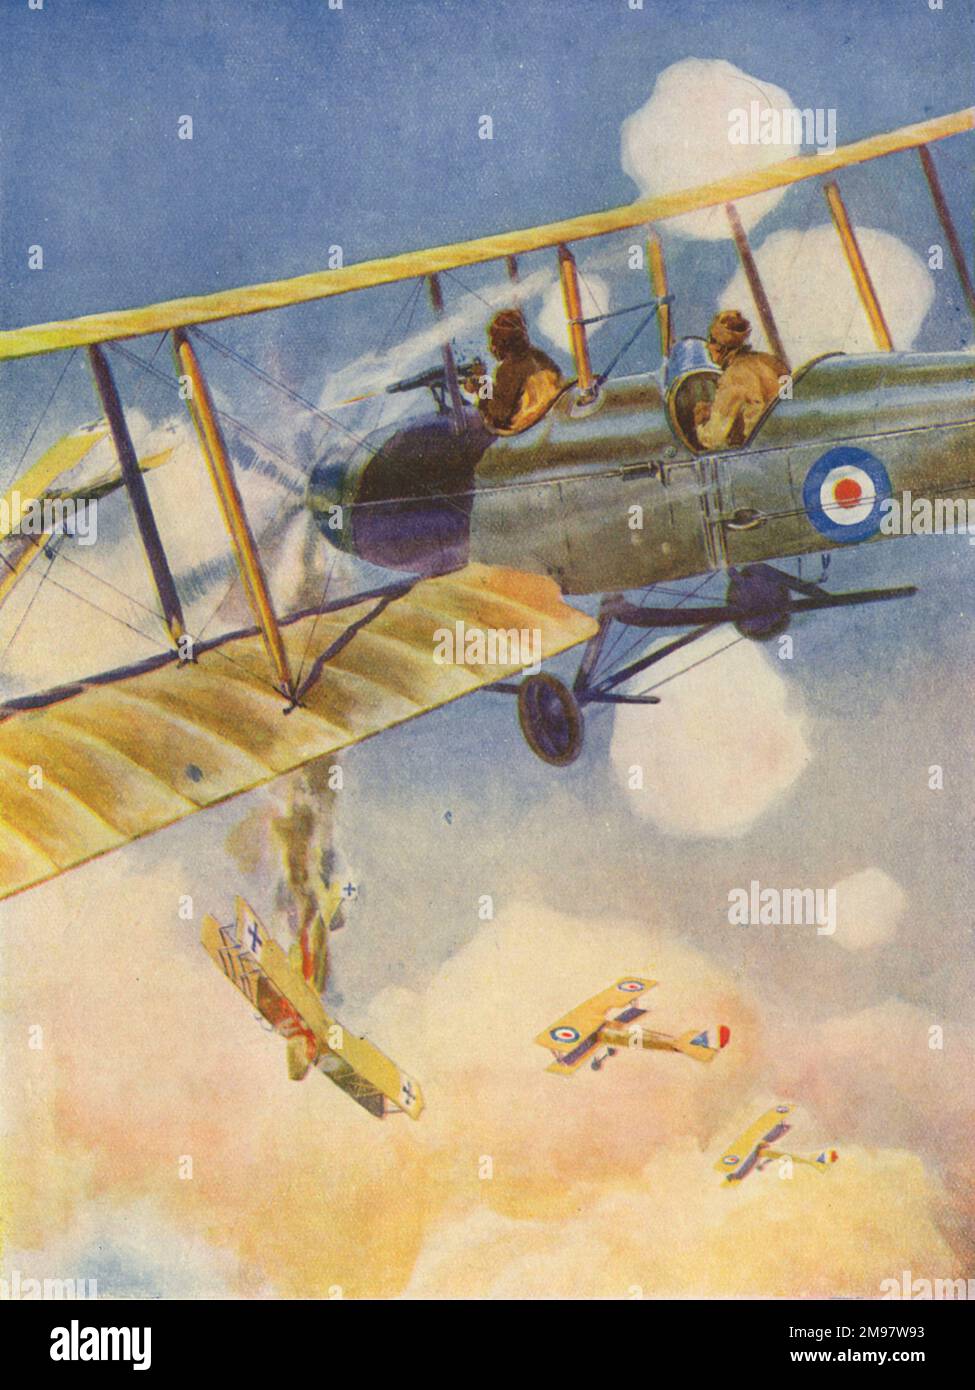 Another Down - WW1 dogfight. Stock Photo